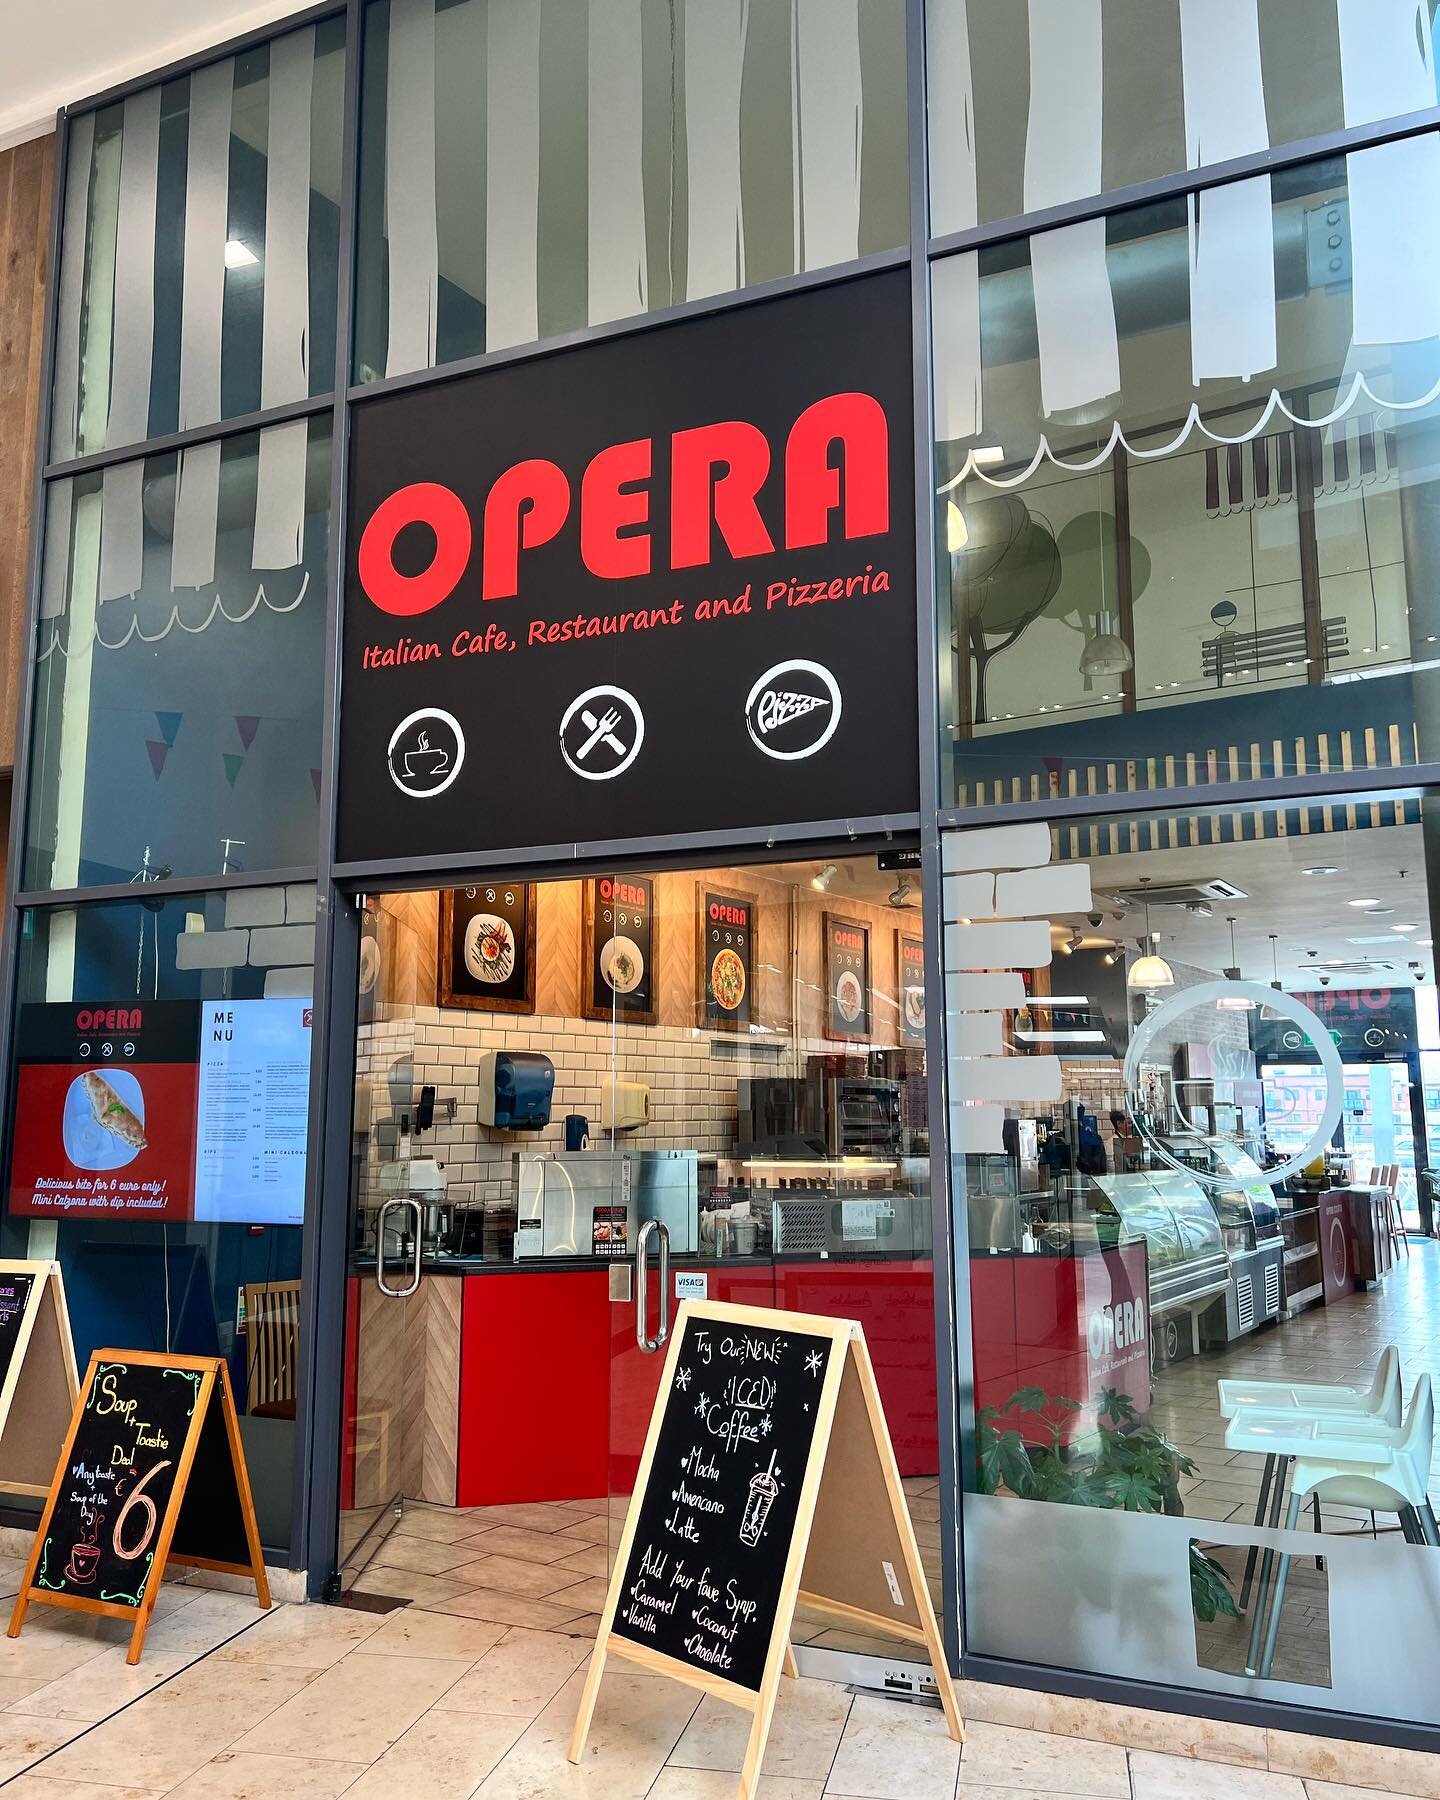 Opera Italian Cafe Restaurant and Pizzeria is back with more amazing deals! 😍

Drop in and pick up a toastie and soup for ONLY &euro;6! Takeaway is also available! 🥣

#foodideas #soupideas #mealdeal #mealdeals #dinnerideas #lunchideas